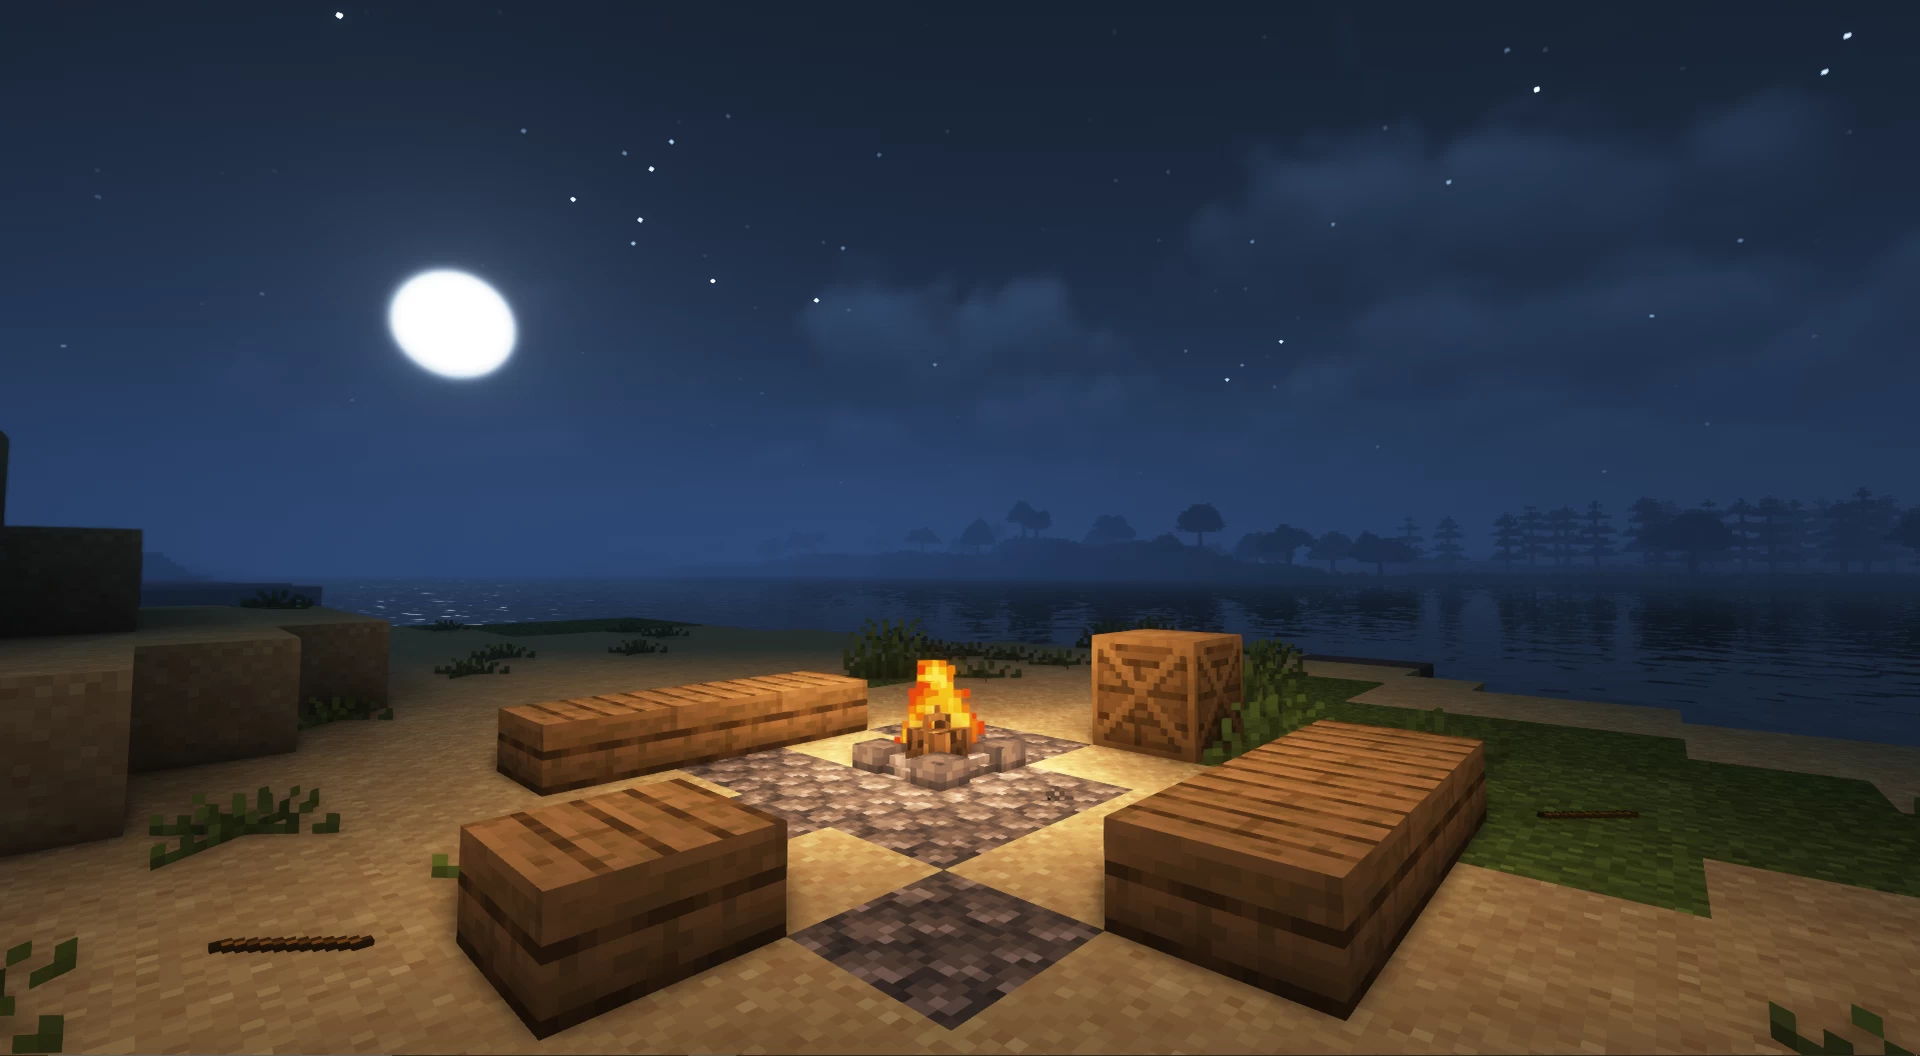 Campfire on the beach in the evening